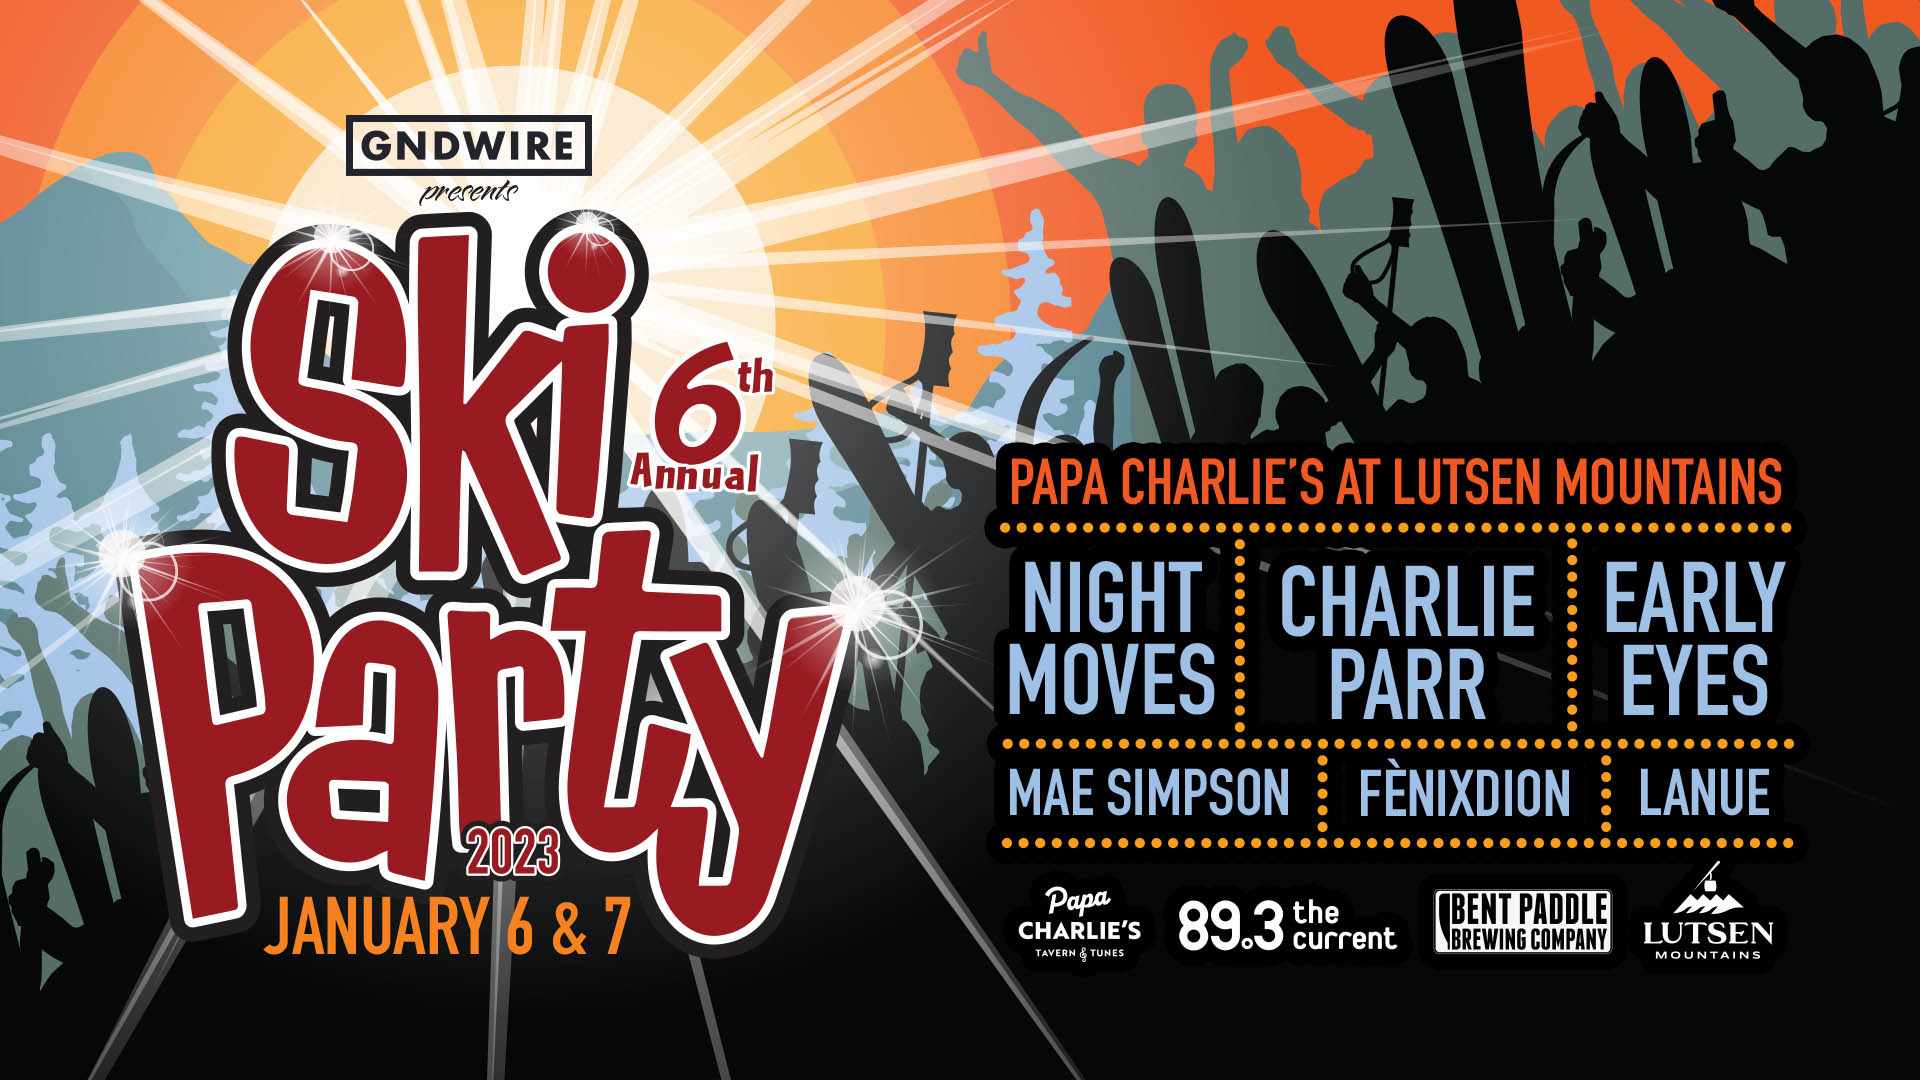 GNDWIRE presents 6th Annual SKI PARTY January 6 & 7 Papa Charlie's at Lutsen Mountains Doors 8pm :: Music 9pm 2-DAY - $35 (Advance Only) FRI - $20 ADV / $25 DOS SAT- $20 ADV / $25 DOS